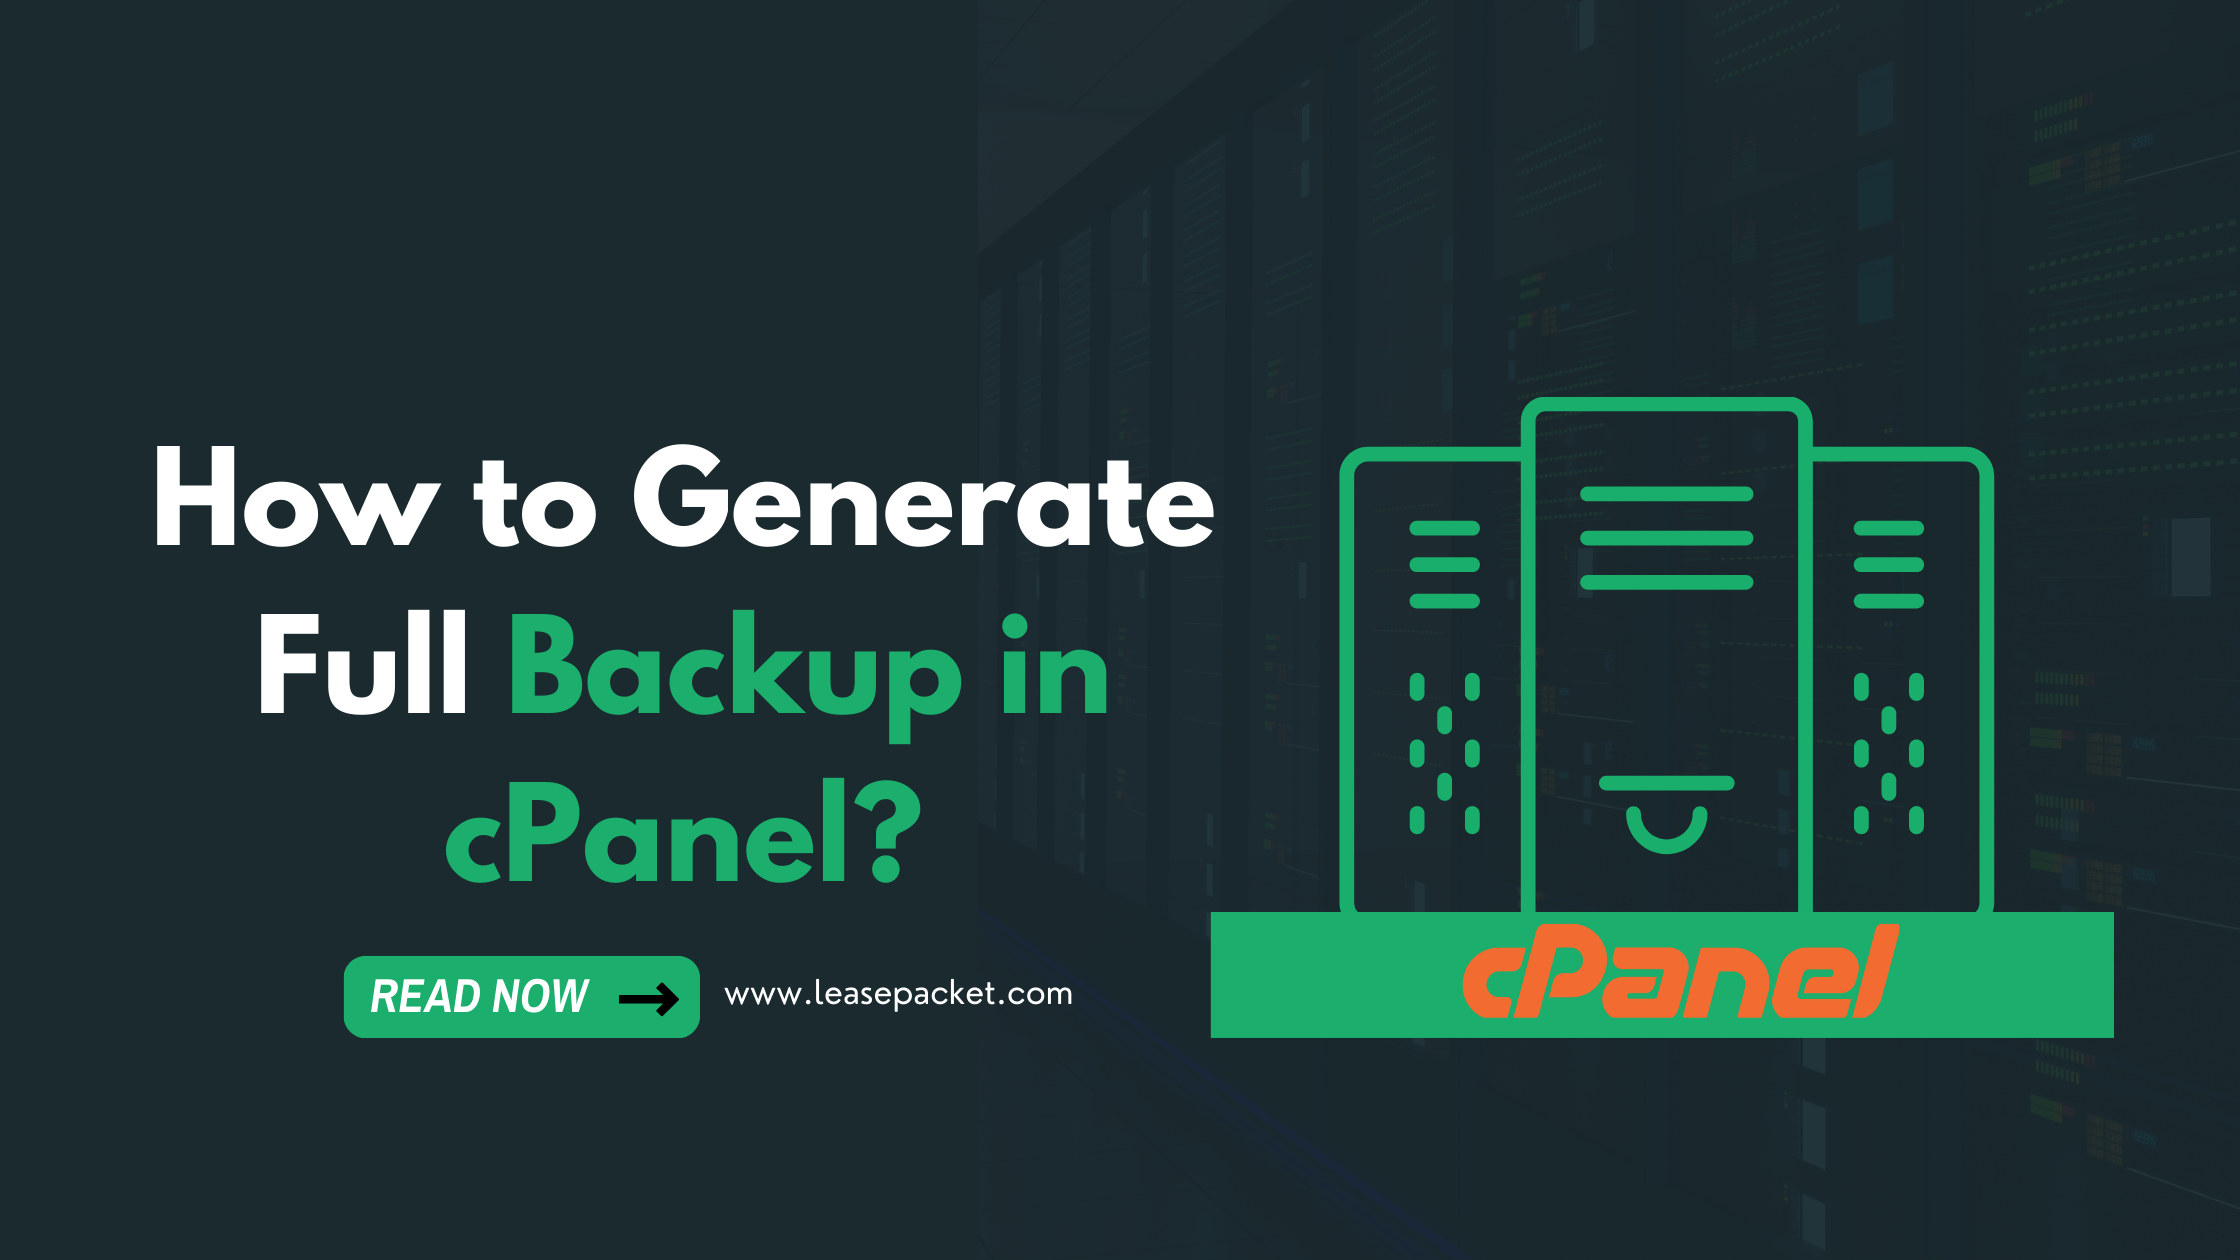 You are currently viewing How to Generate Full Backup in cPanel?